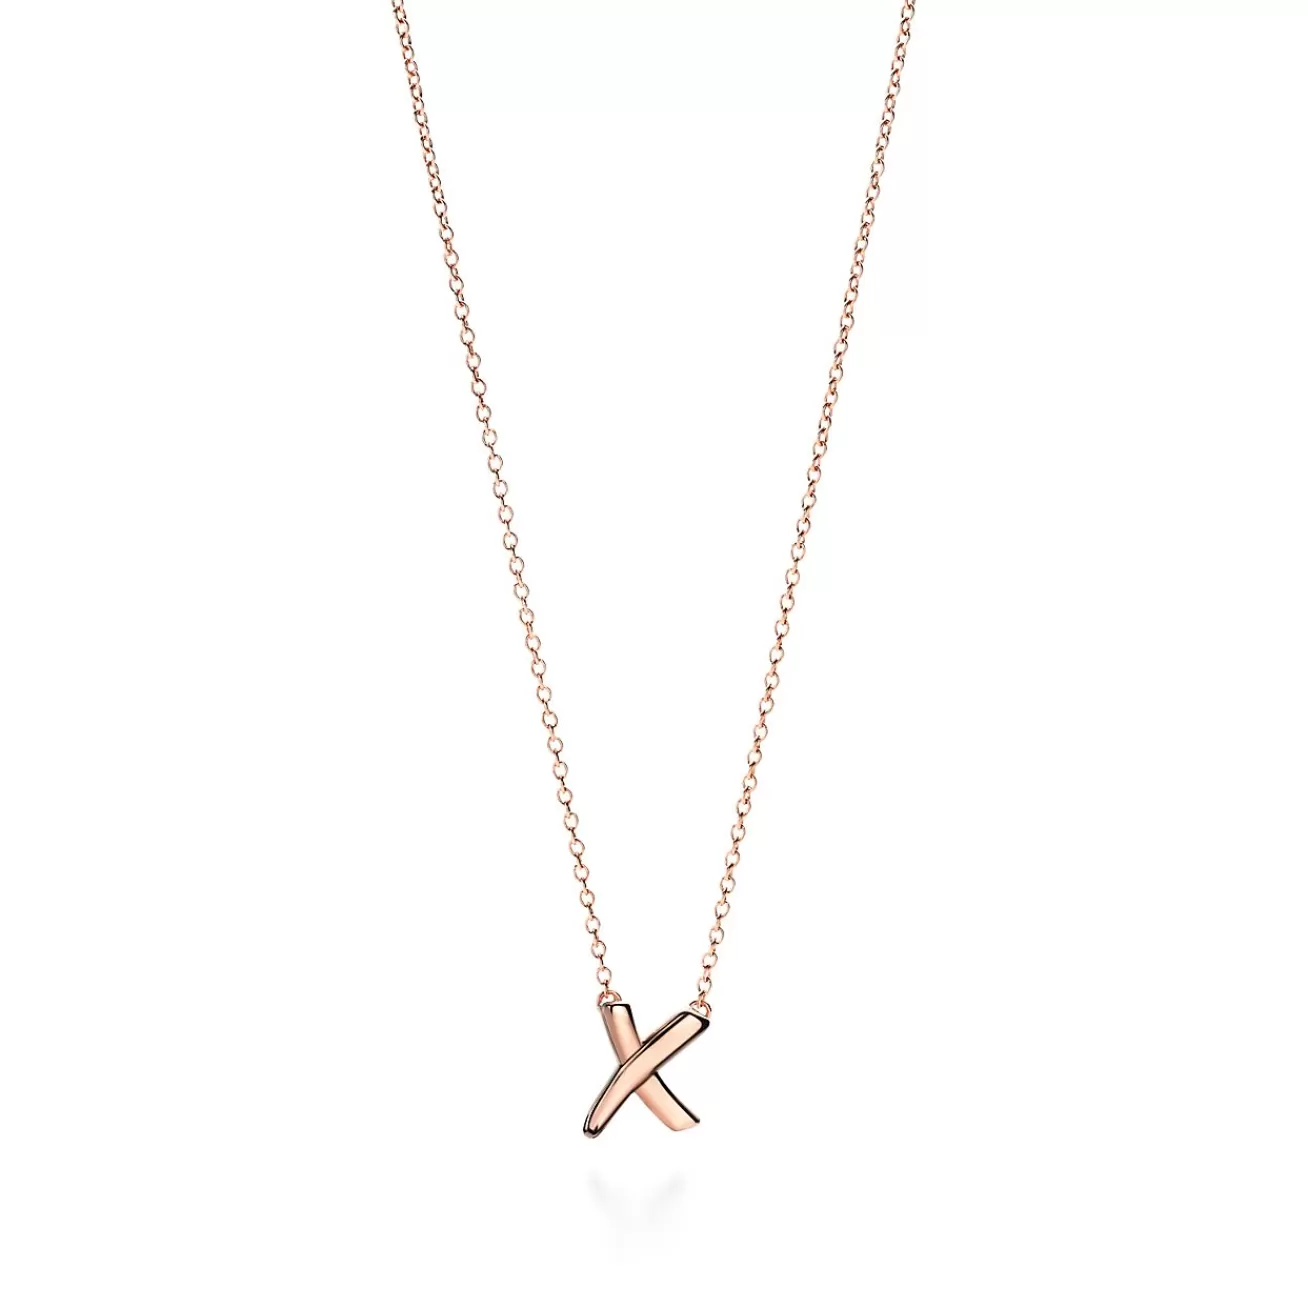 Tiffany & Co. Paloma's Graffiti X pendant in 18k rose gold, small. | ^ Necklaces & Pendants | Rose Gold Jewelry